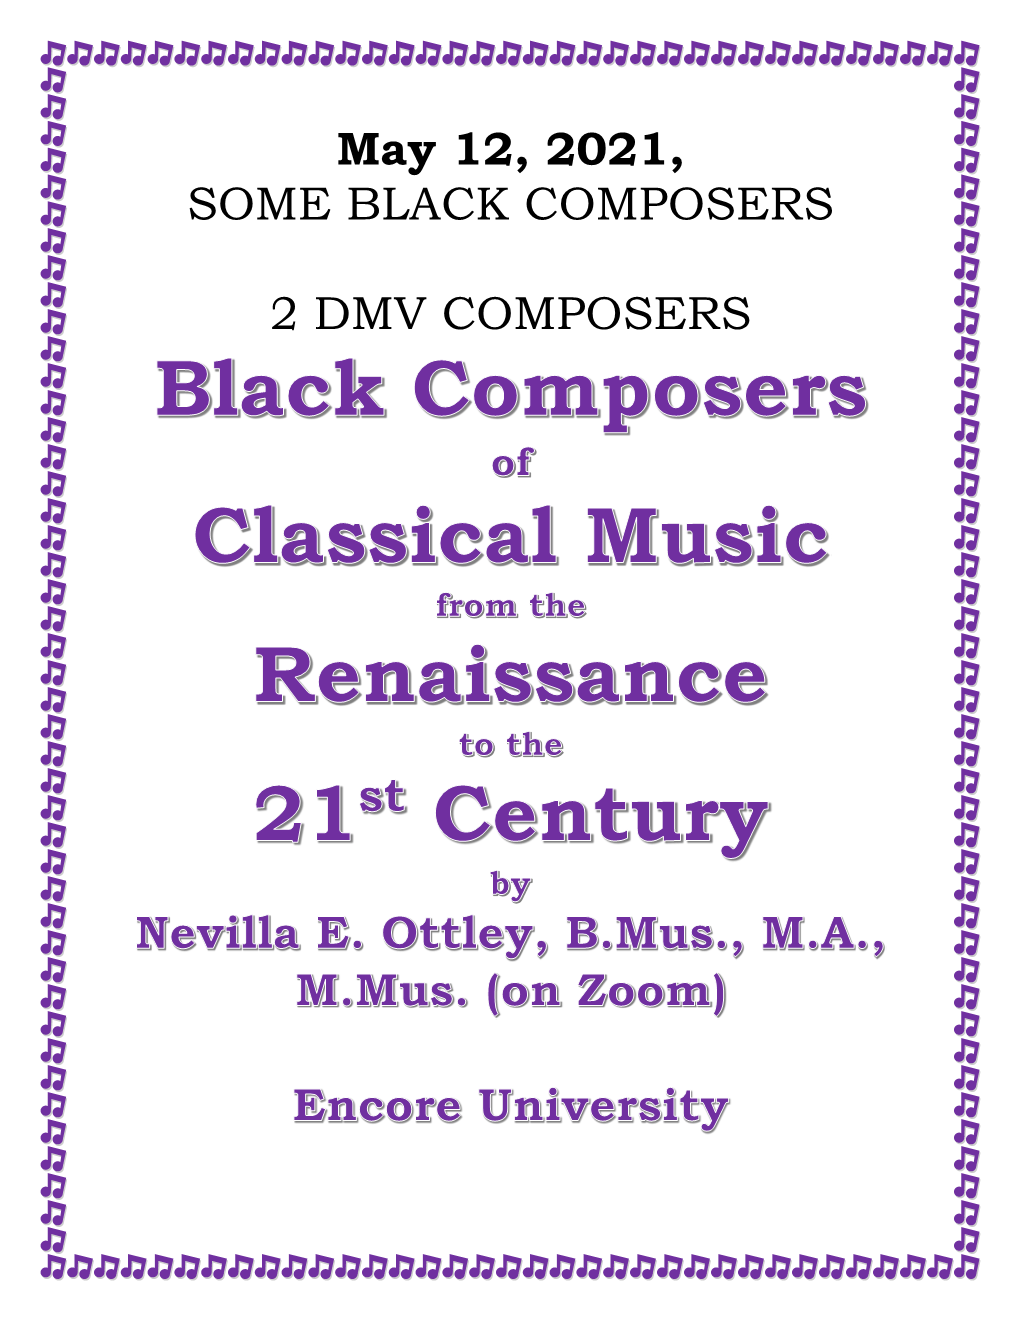 May 12, 2021, SOME BLACK COMPOSERS 2 DMV COMPOSERS